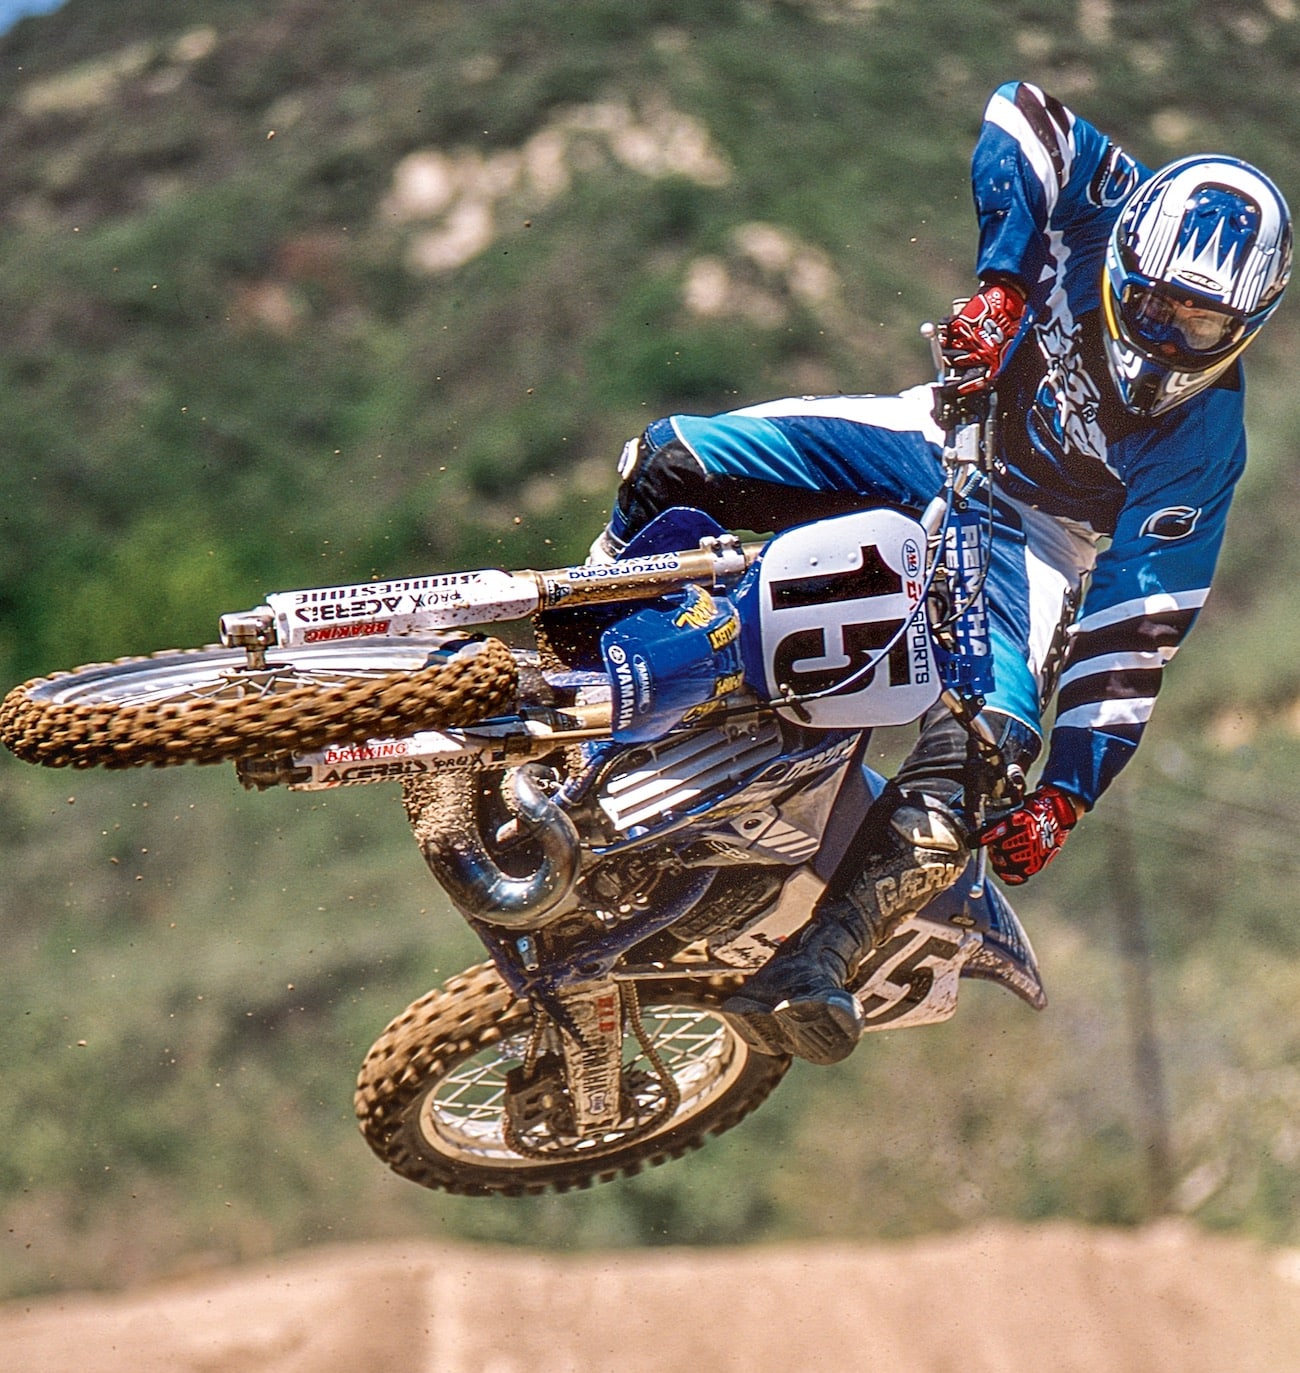 INTERVIEW: TIM FERRY IN RACING IN THE OF THE GIANTS - Motocross Magazine